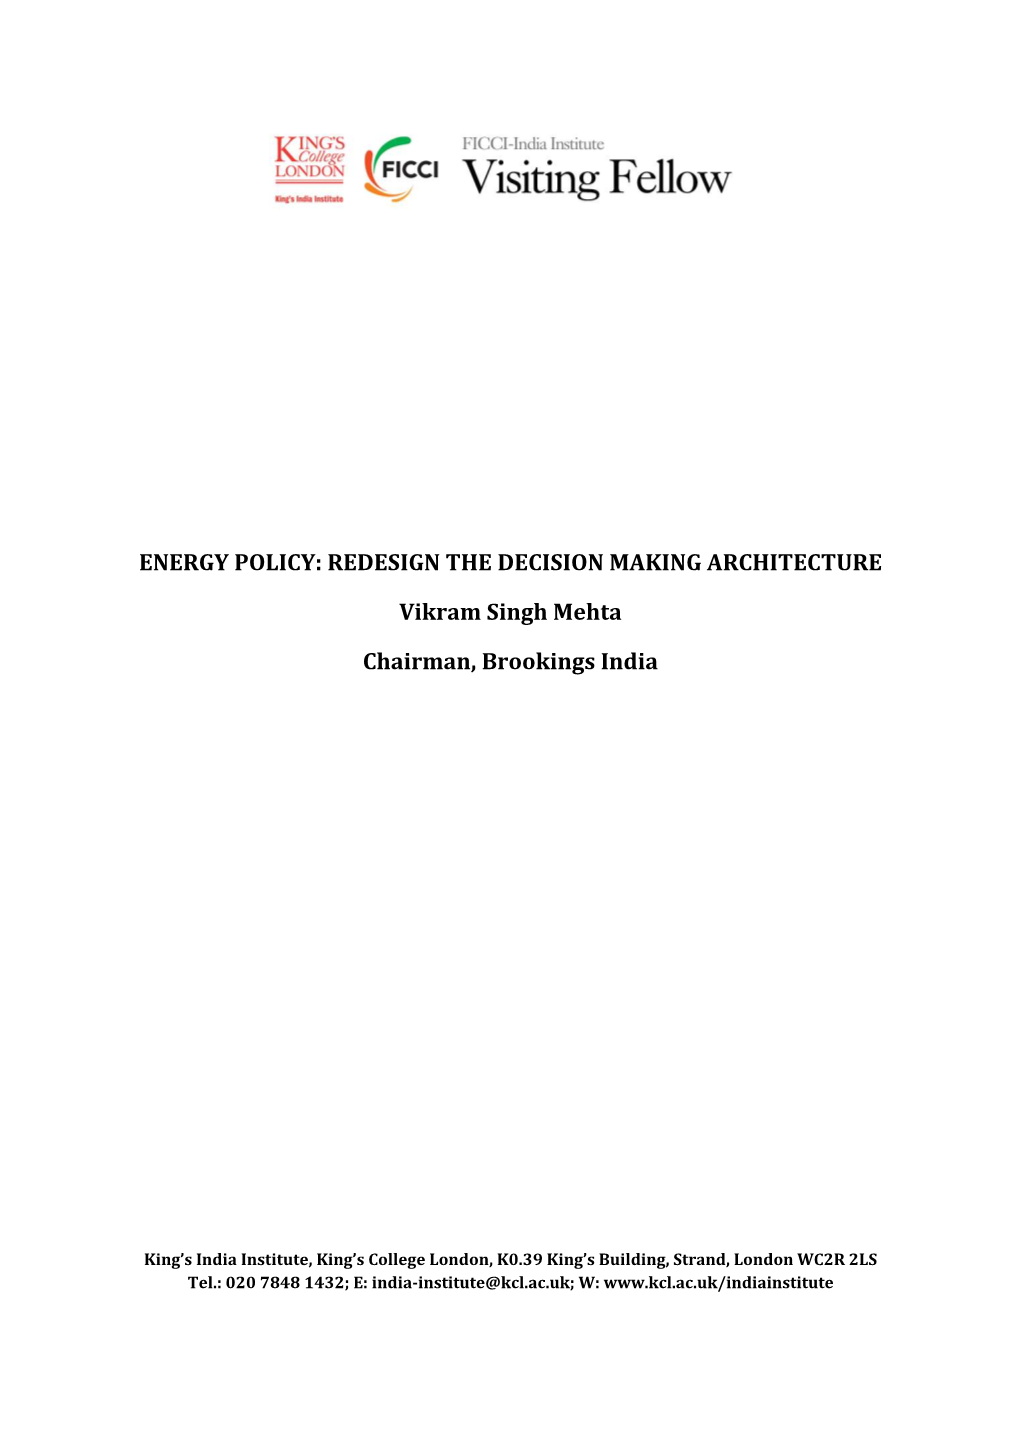 Energy Policy: Redesign the Decision Making Architecture